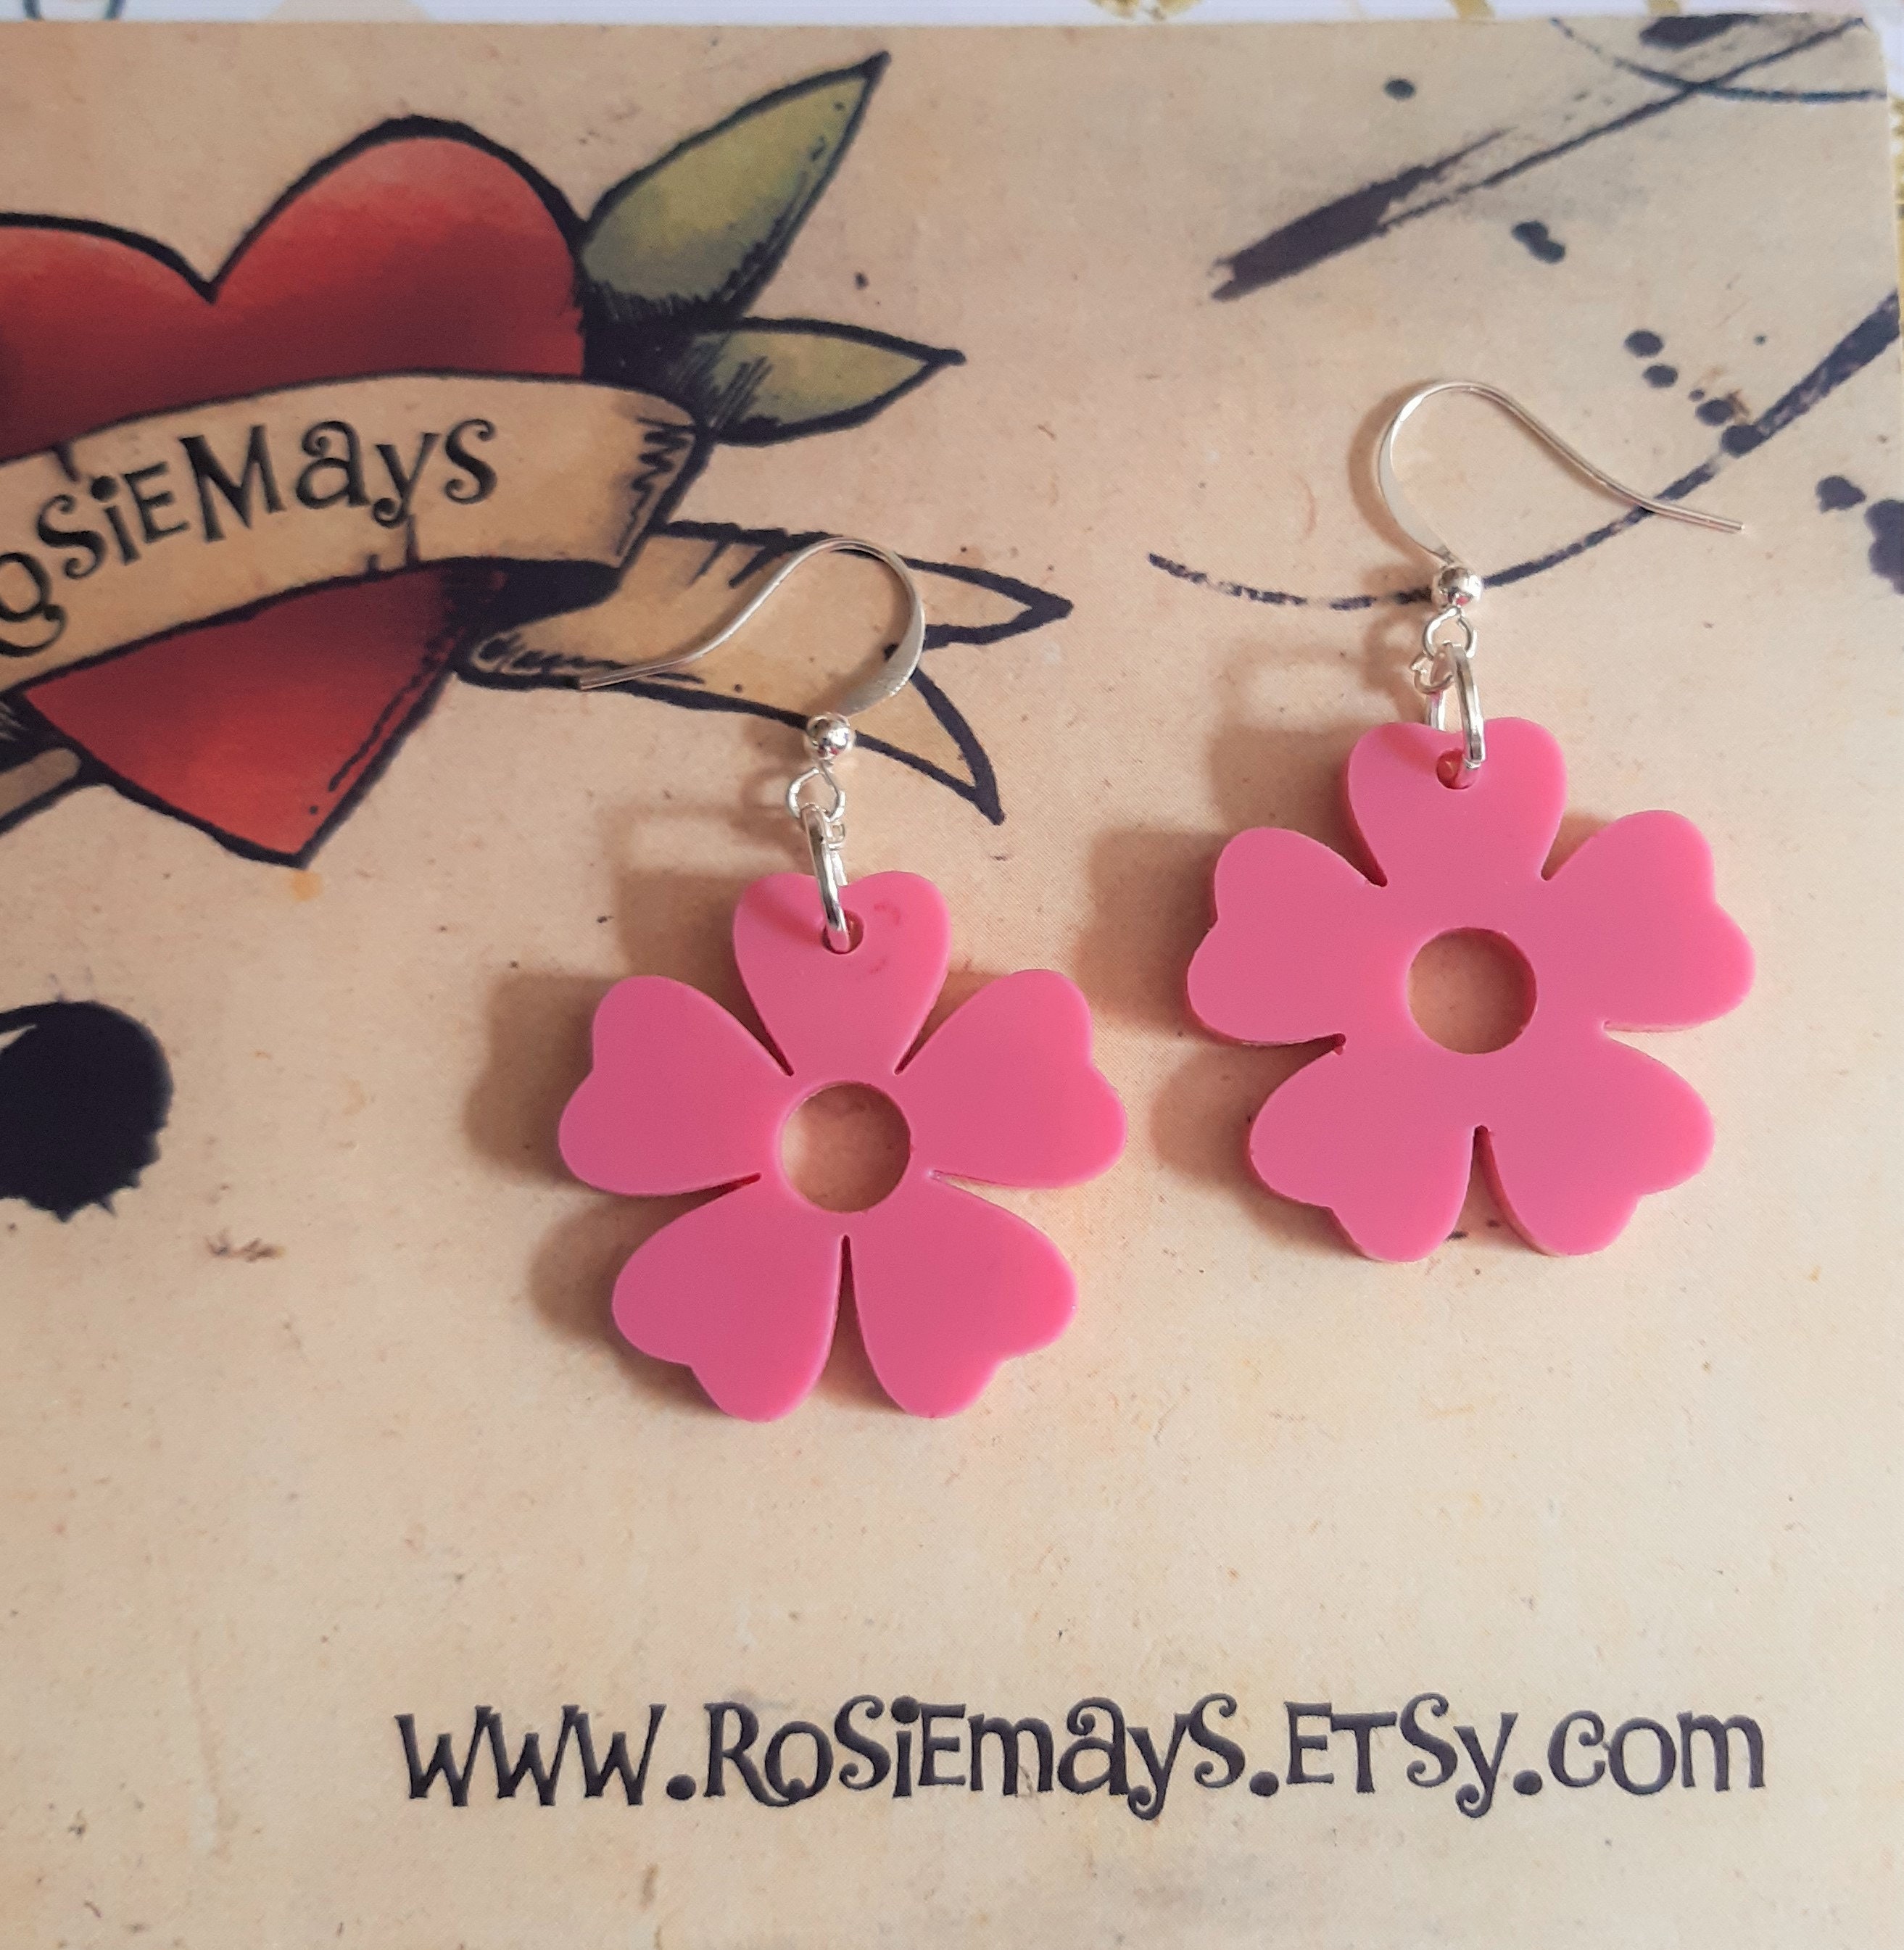 1960s Mod Inspired pink sequin Daisy Earrings